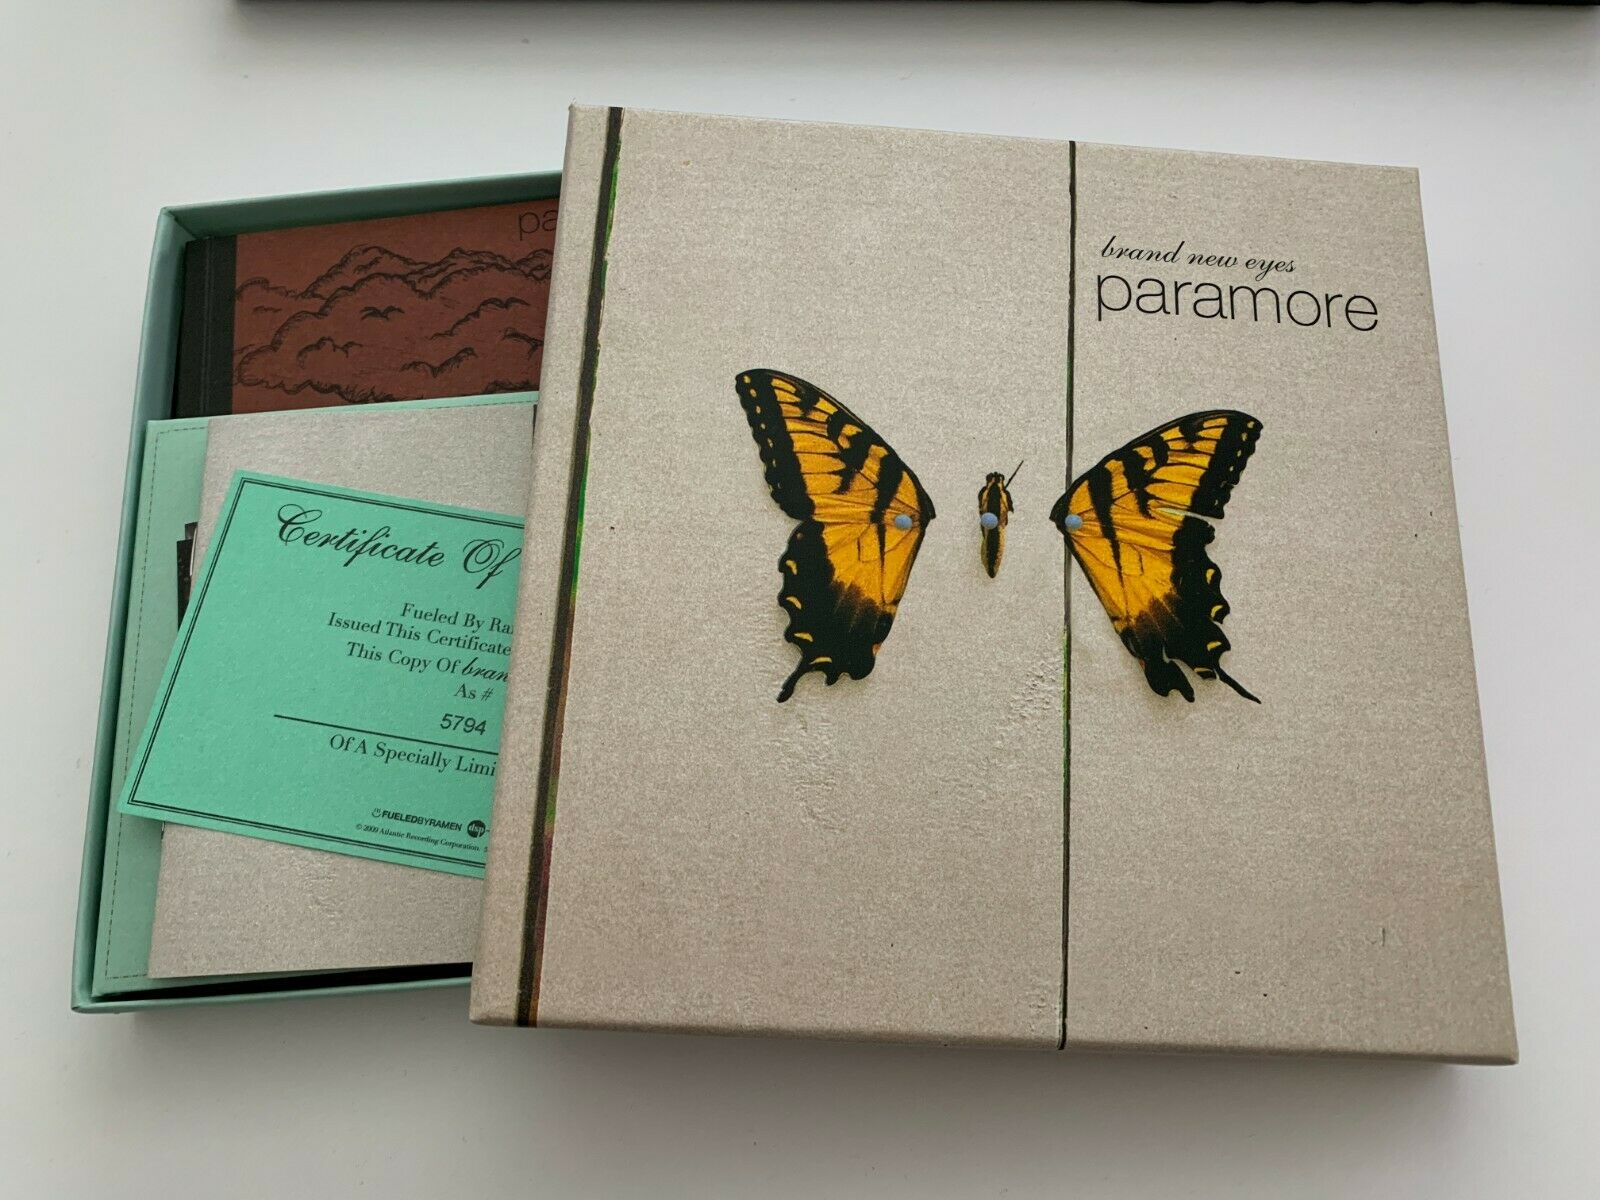  Paramore - Brand New Eyes (Limited Edition Box Set w